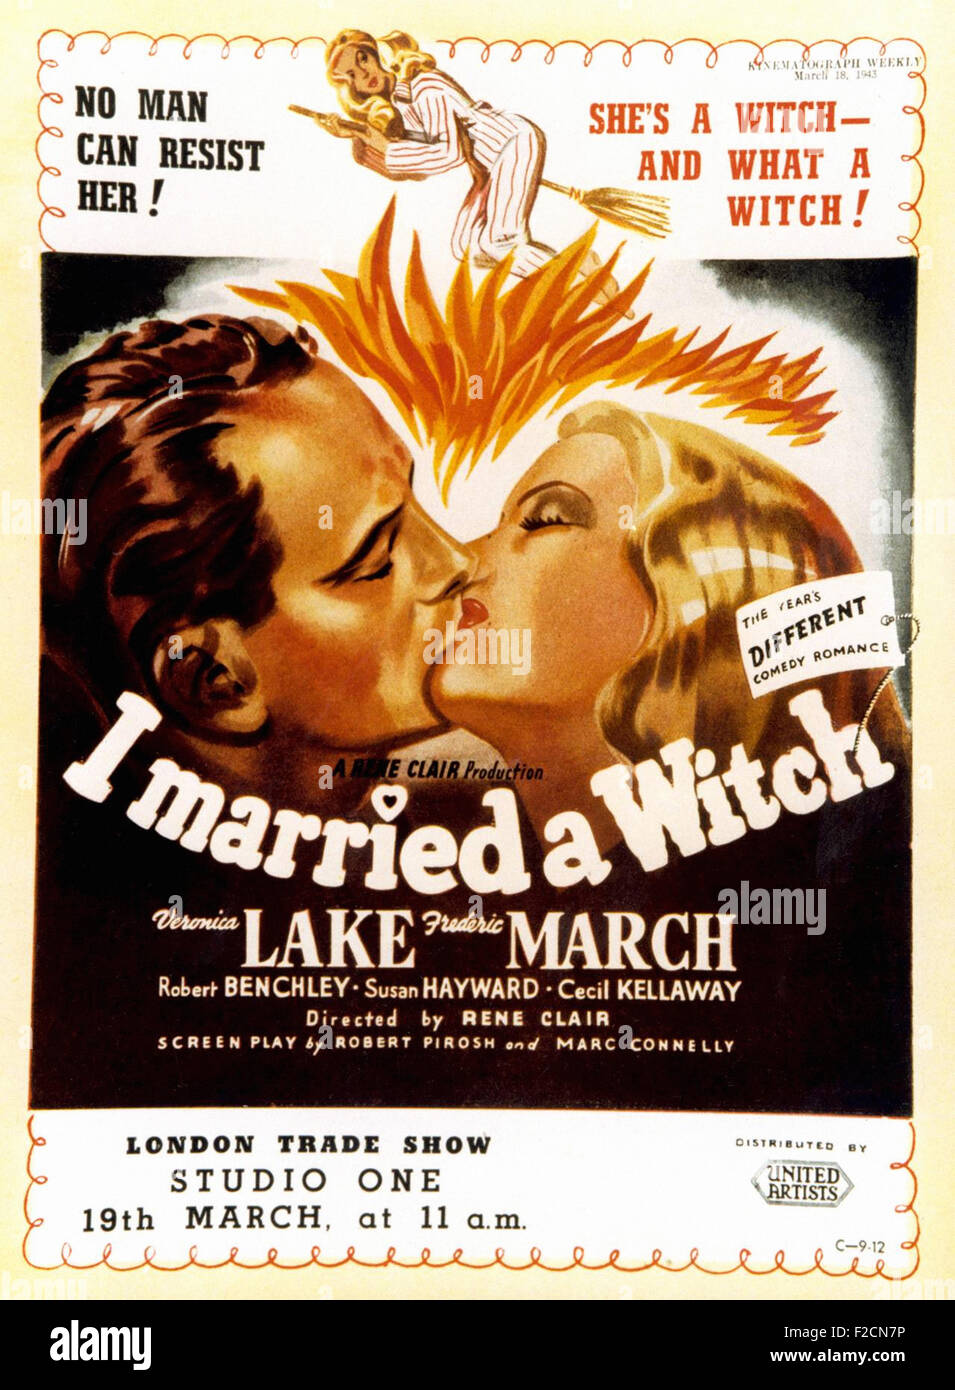 I Married a Witch 02 - Movie Poster Stock Photo